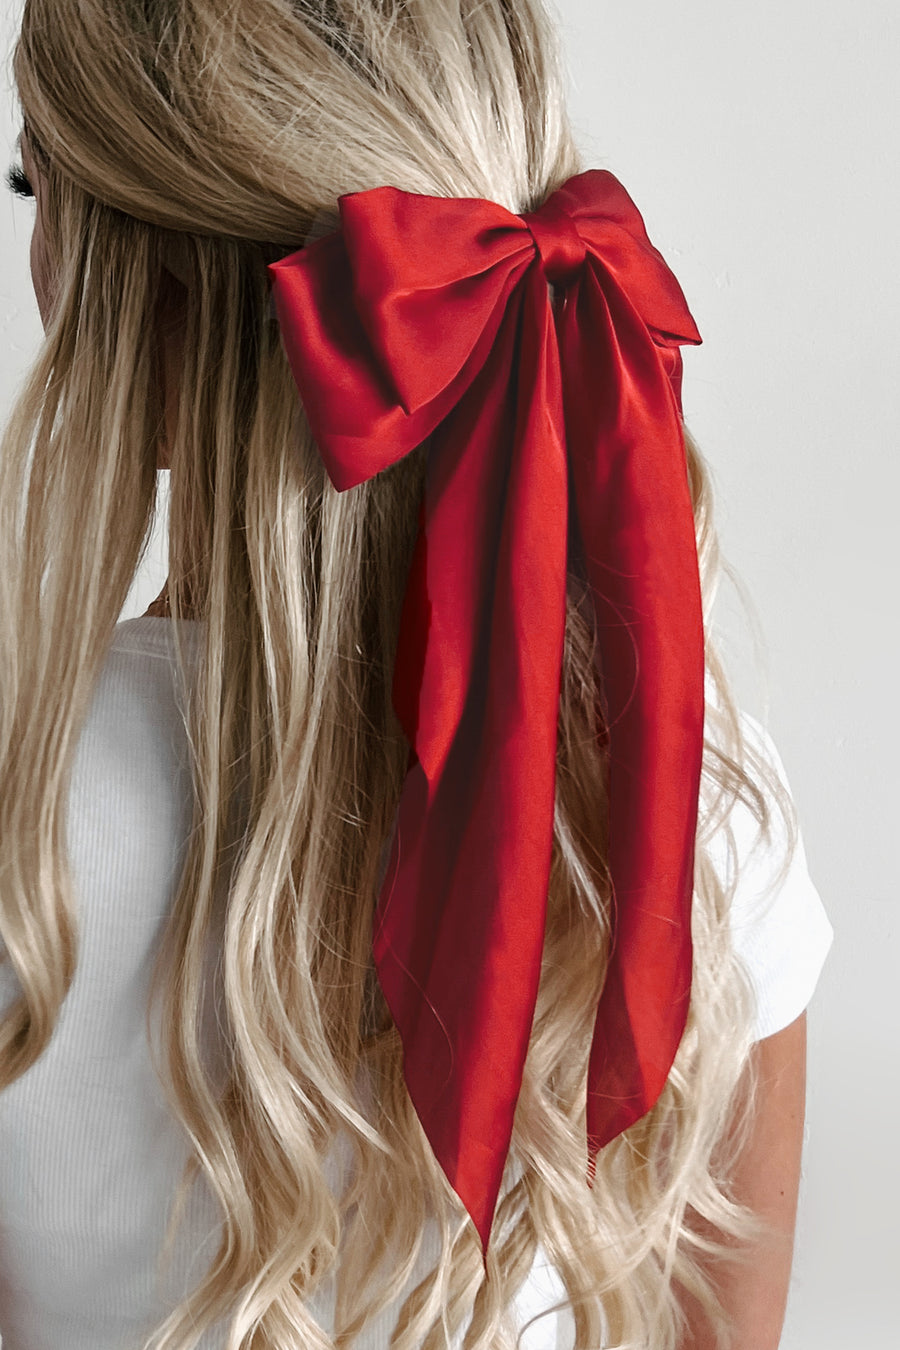 All About The Details Barrette Clip Satin Hair Bow (Ruby Red) - NanaMacs